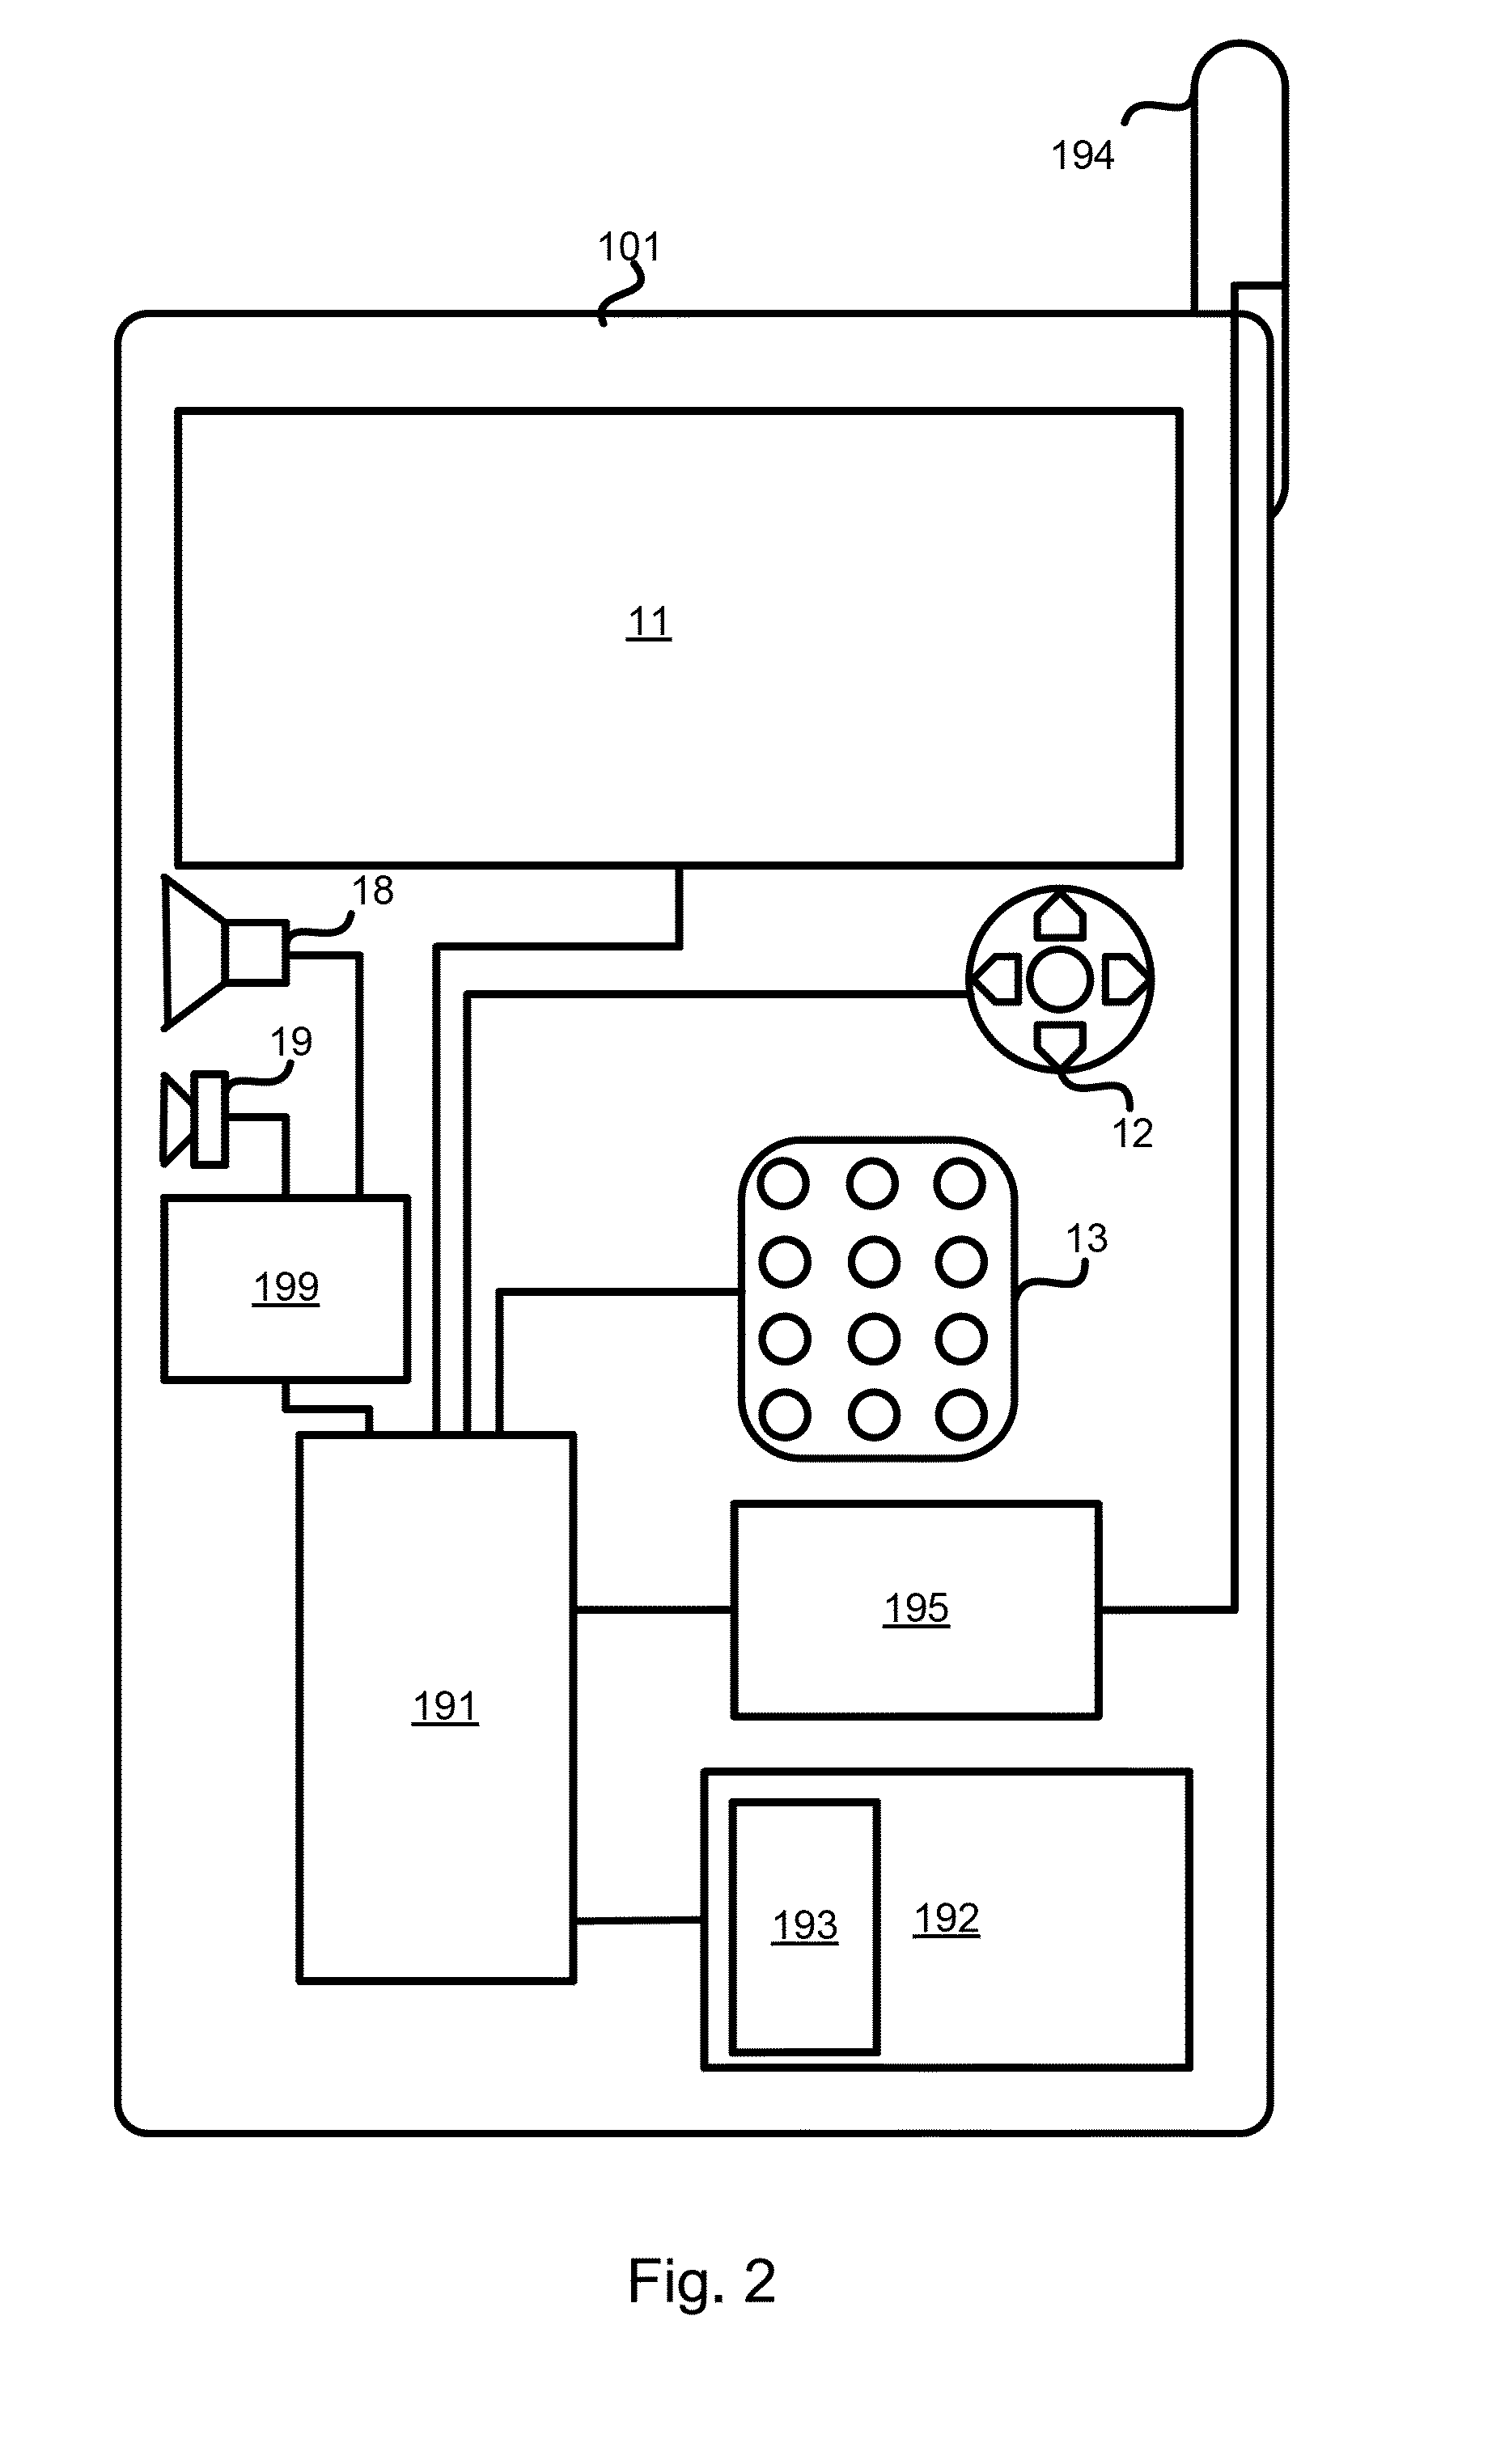 Method and apparatus for updating rules governing the switching of virtual SIM service contracts